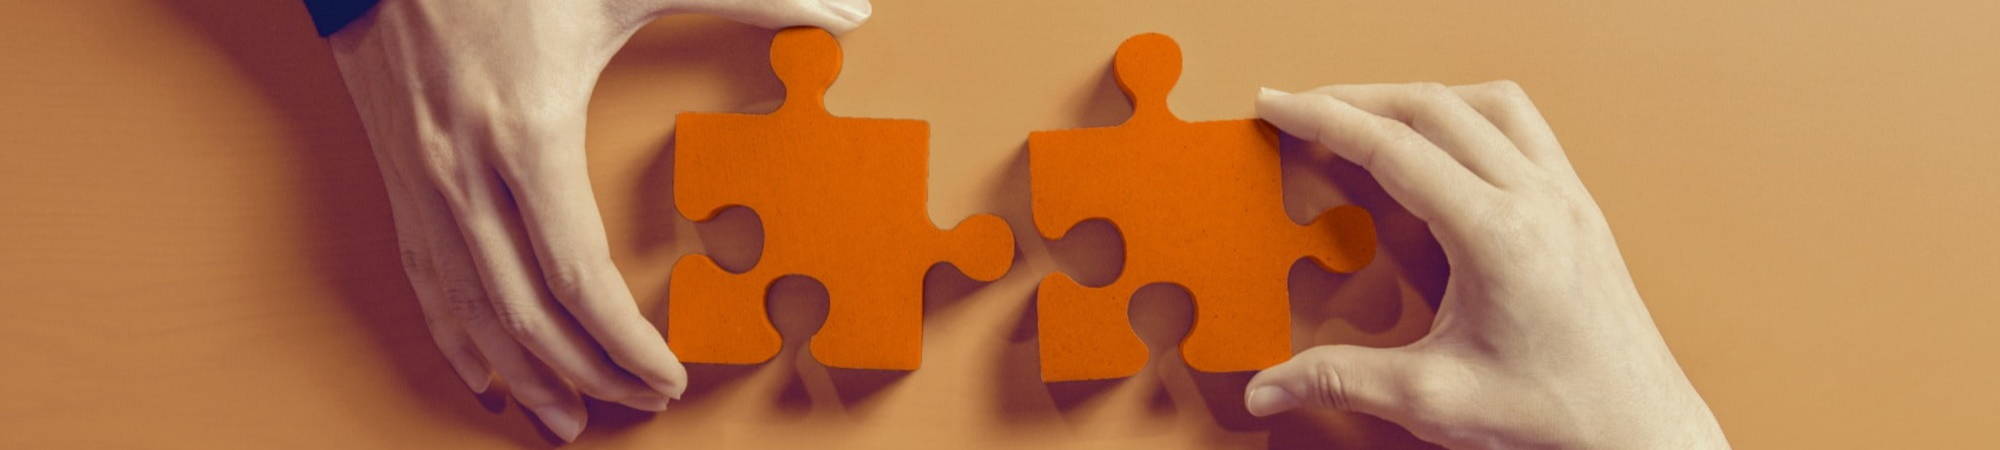 Impact HR Group partners with allied businesses which fit together like pieces of a puzzle